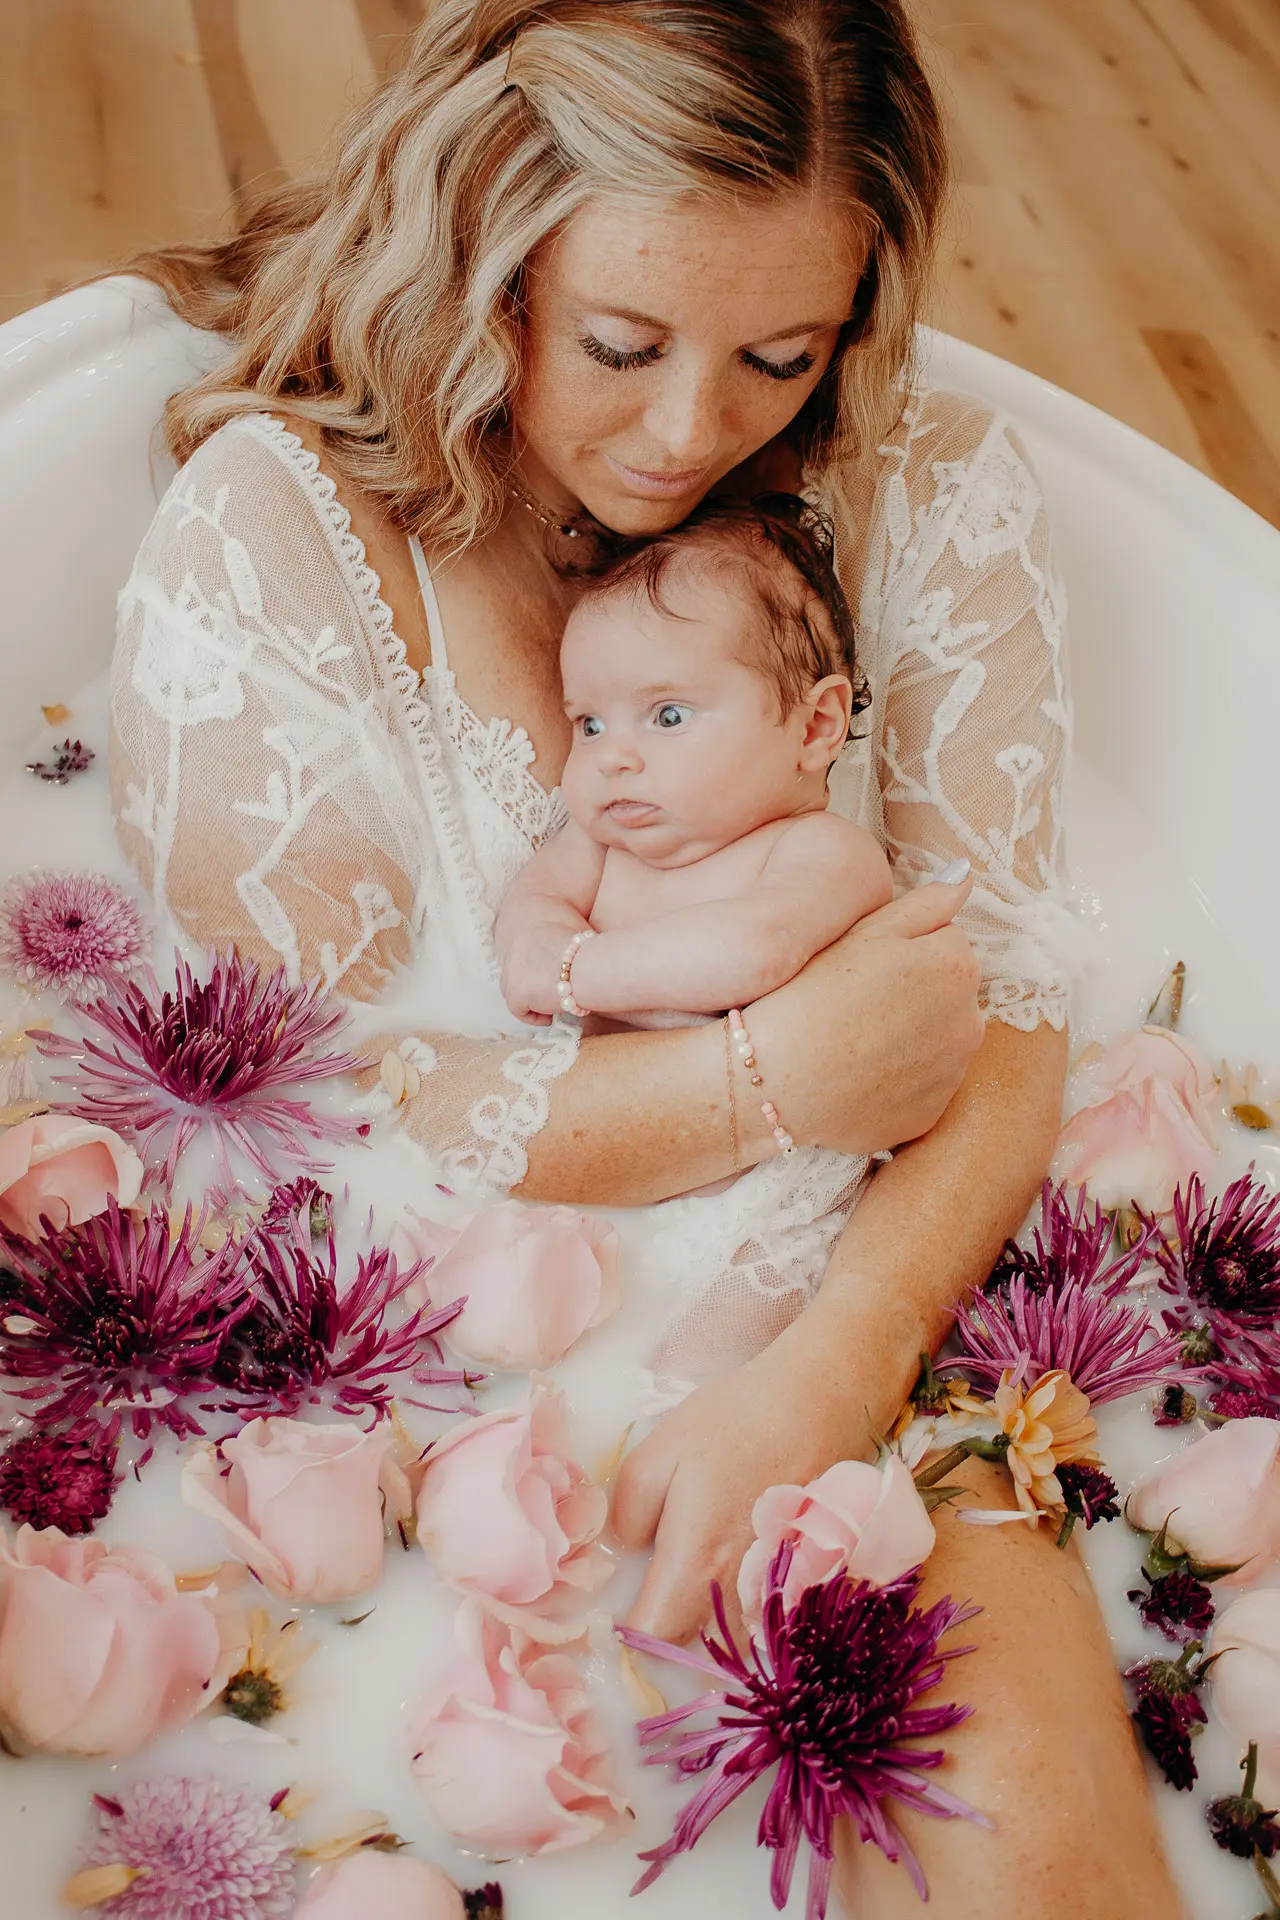 Mother clutching her baby in a milk bath full of flowers